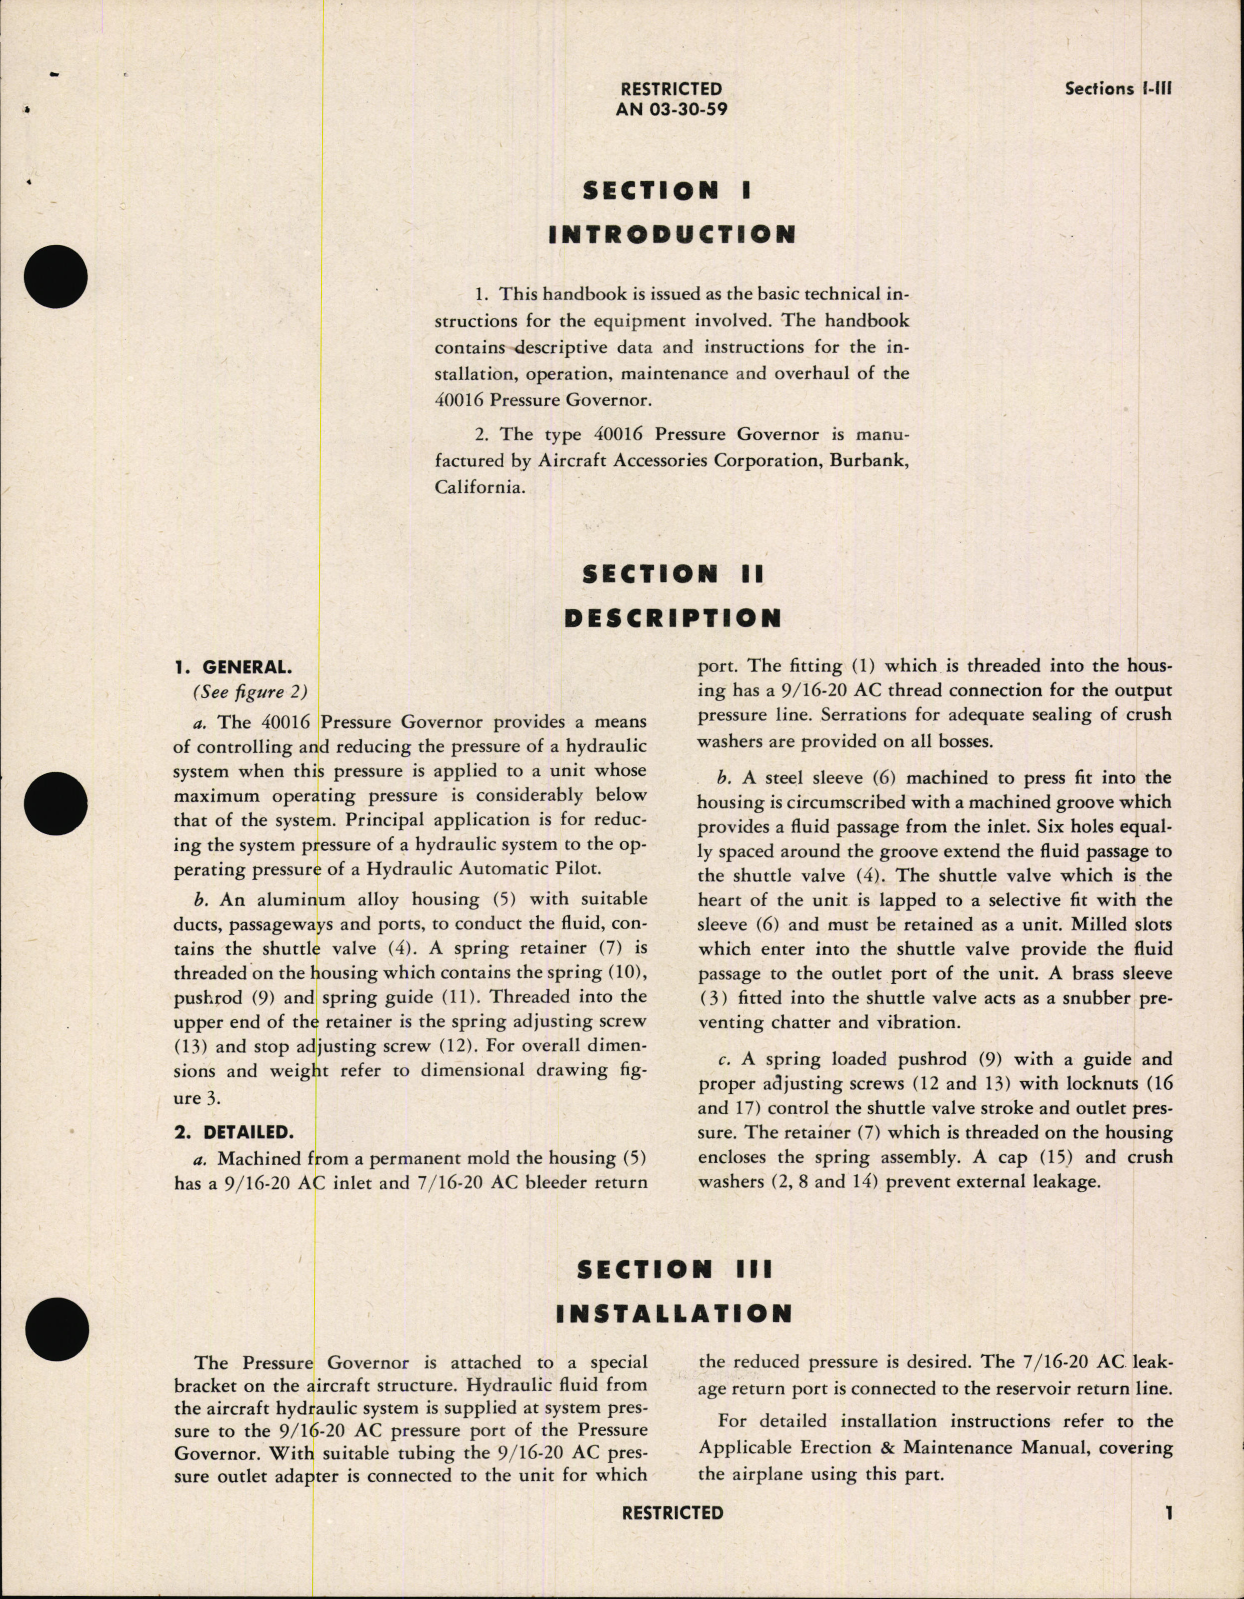 Sample page 5 from AirCorps Library document: Handbook of Instructions with Parts Catalog, Hydraulic System Pressure Governor